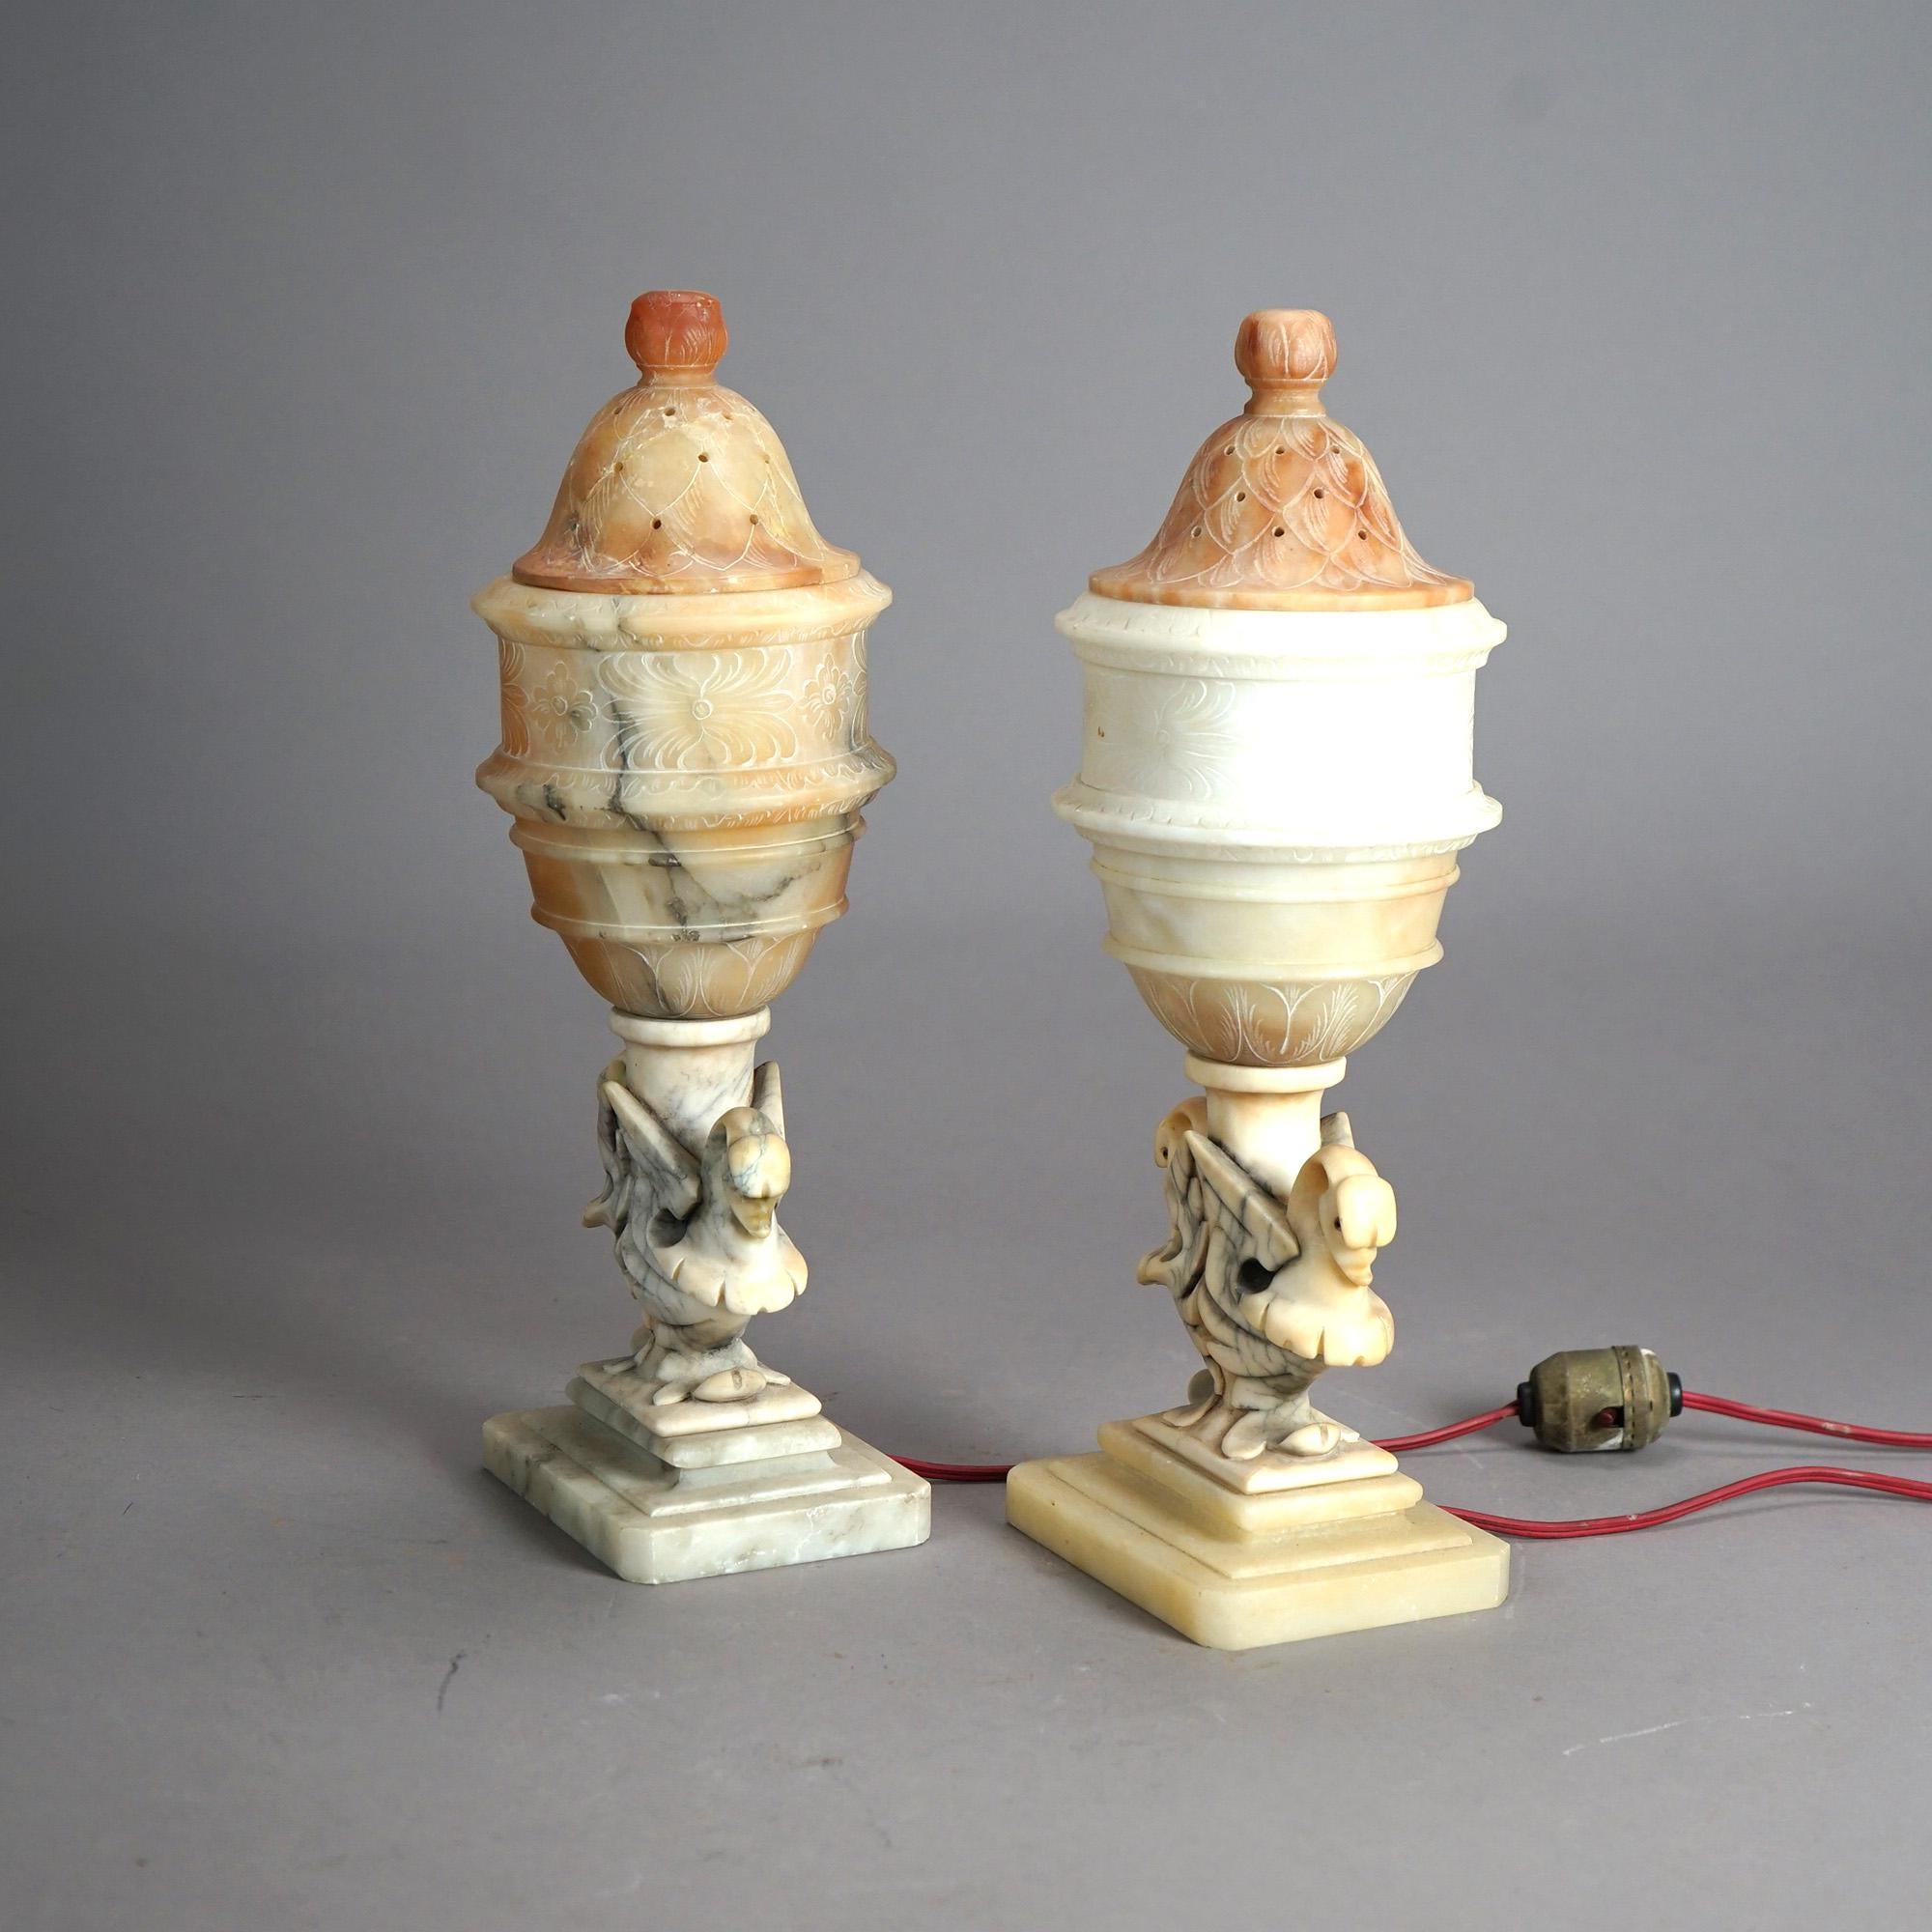 A pair of antique figural boudoir lamps offers alabaster construction with stylized urn form shades over carved bases with swan; c1920

Measures - 14.75